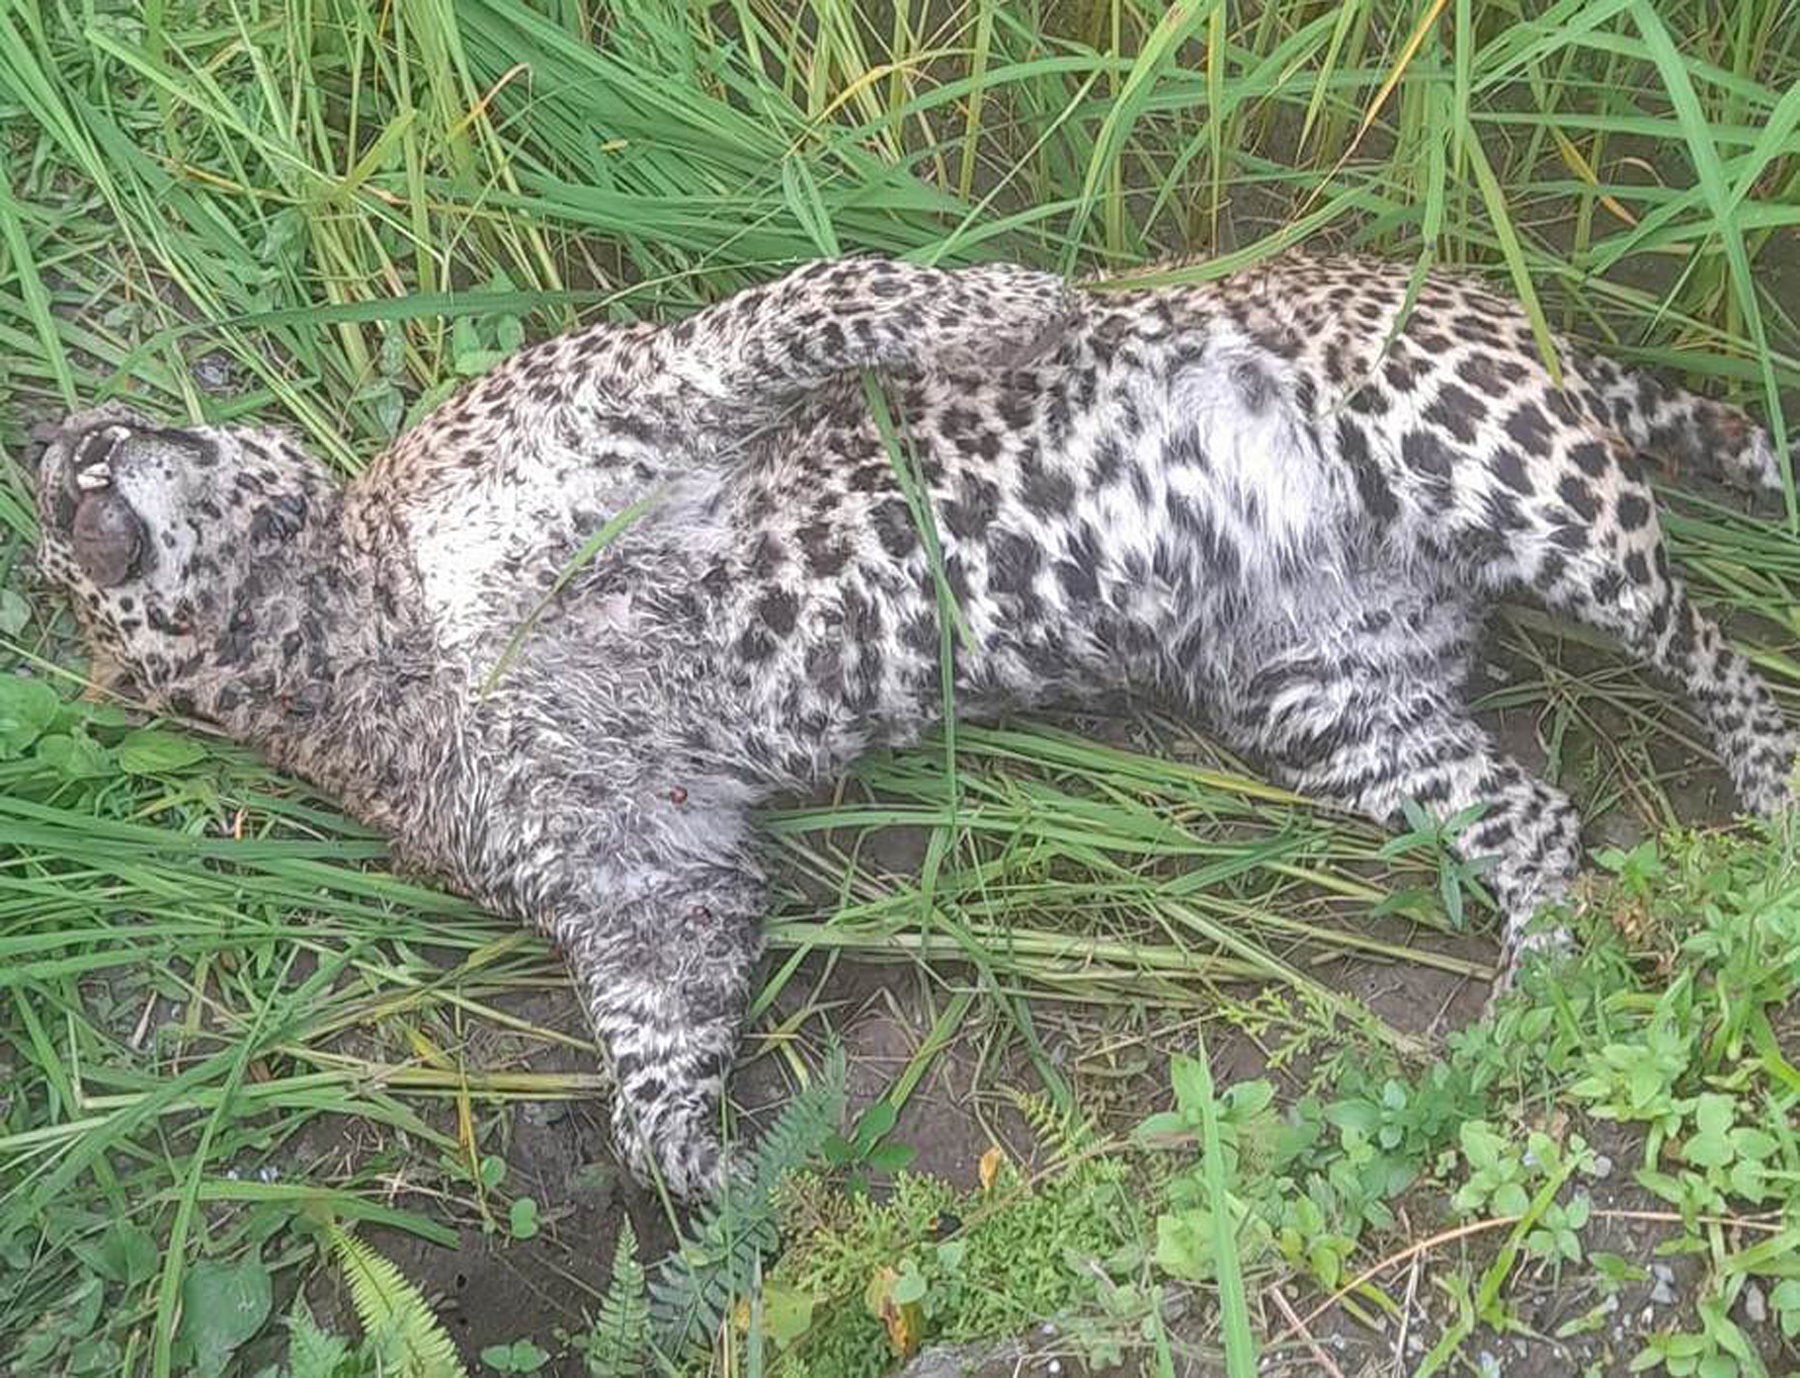 Leopard discovered dead in Parbat